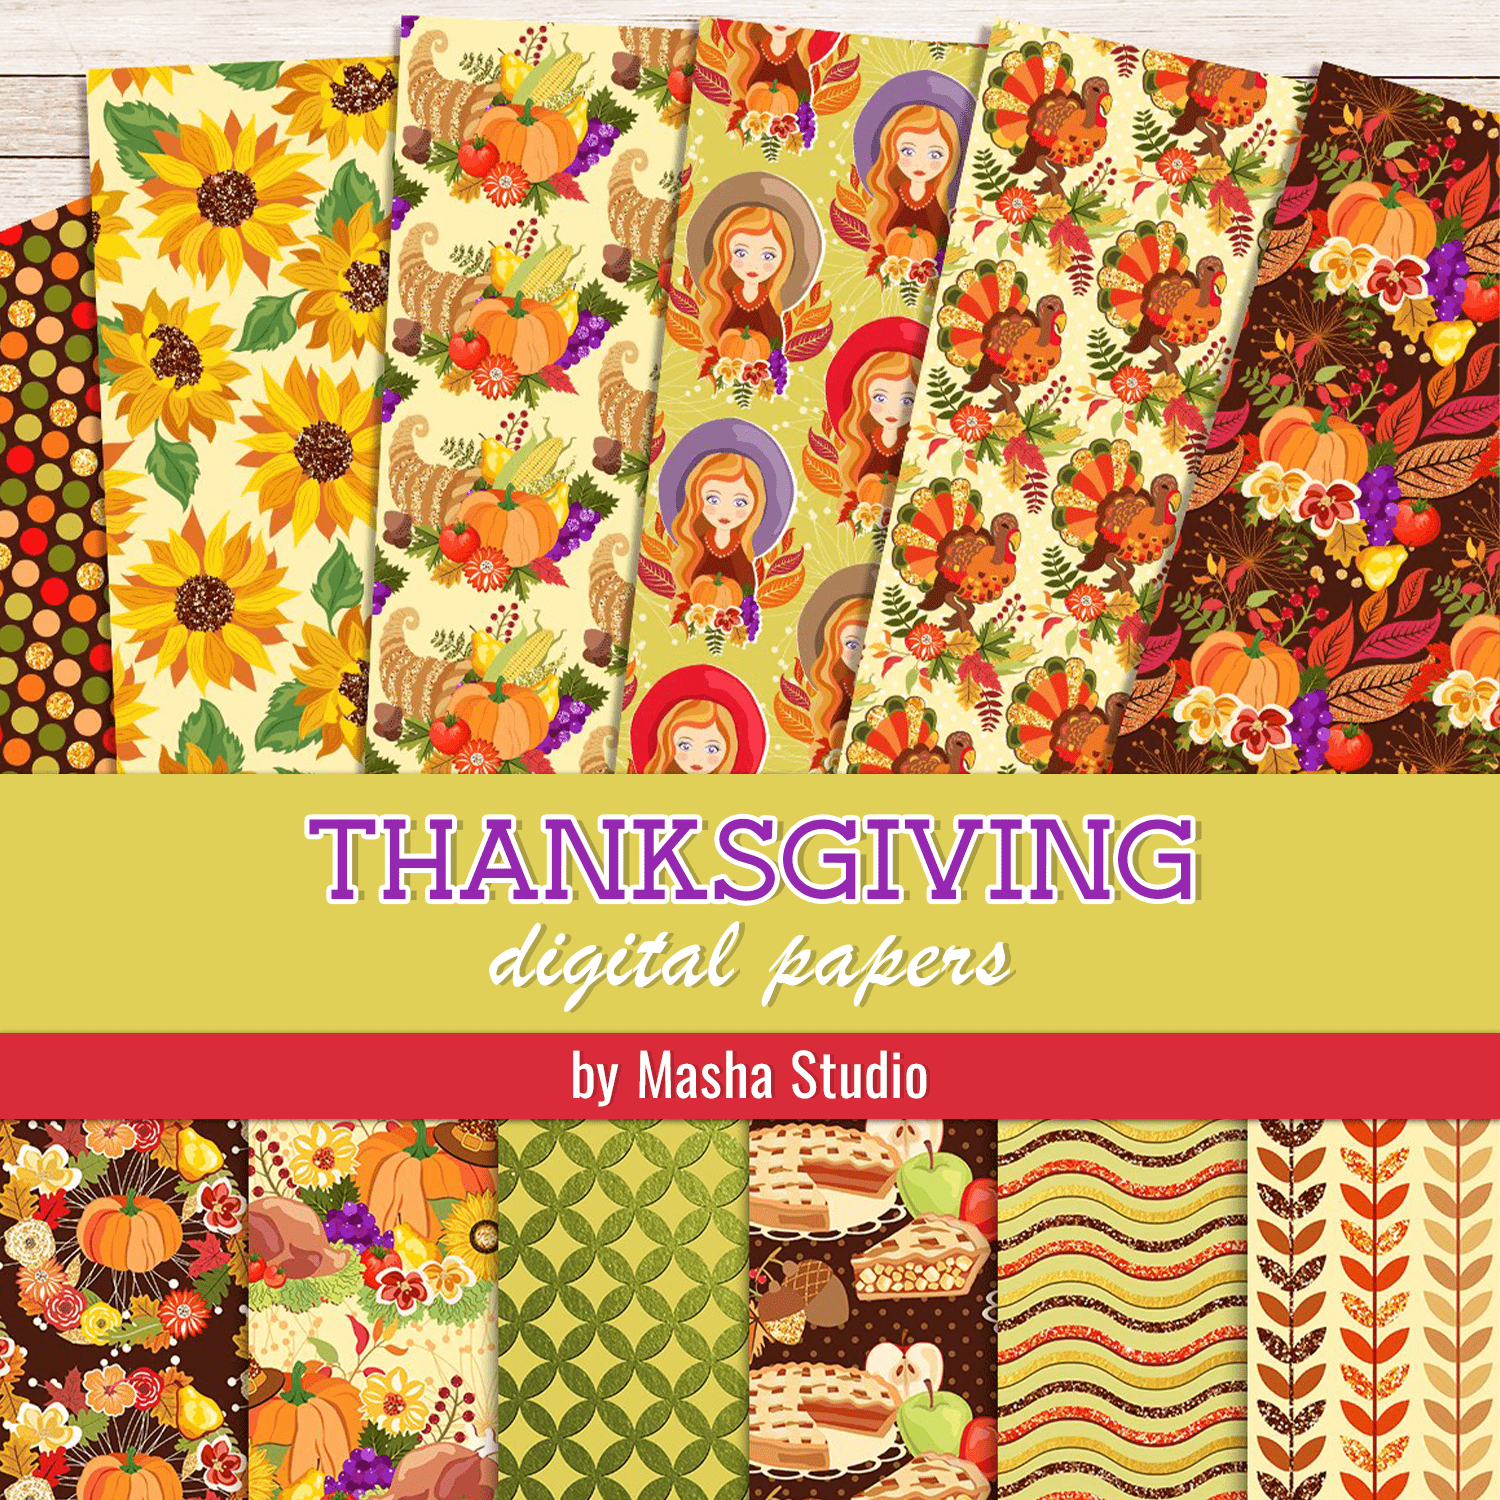 THANKSGIVING digital papers cover.